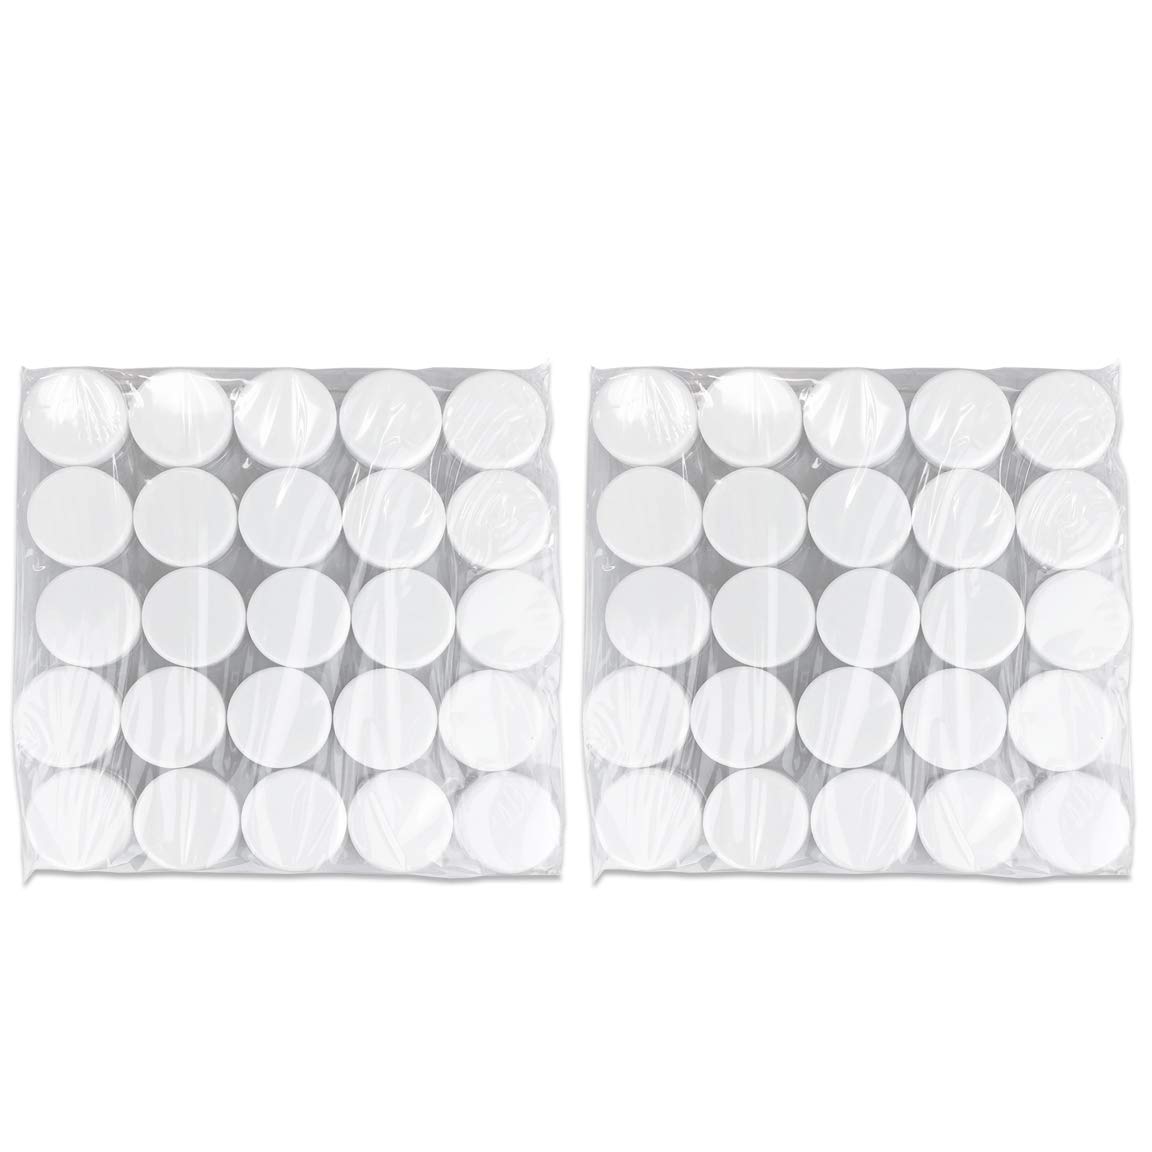 (Quantity: 100 Pieces) Beauticom 5G/5ML Round Clear Jars with White Lids for Acrylic Powder, Rhinestones, Charms and Other Nail Accessories